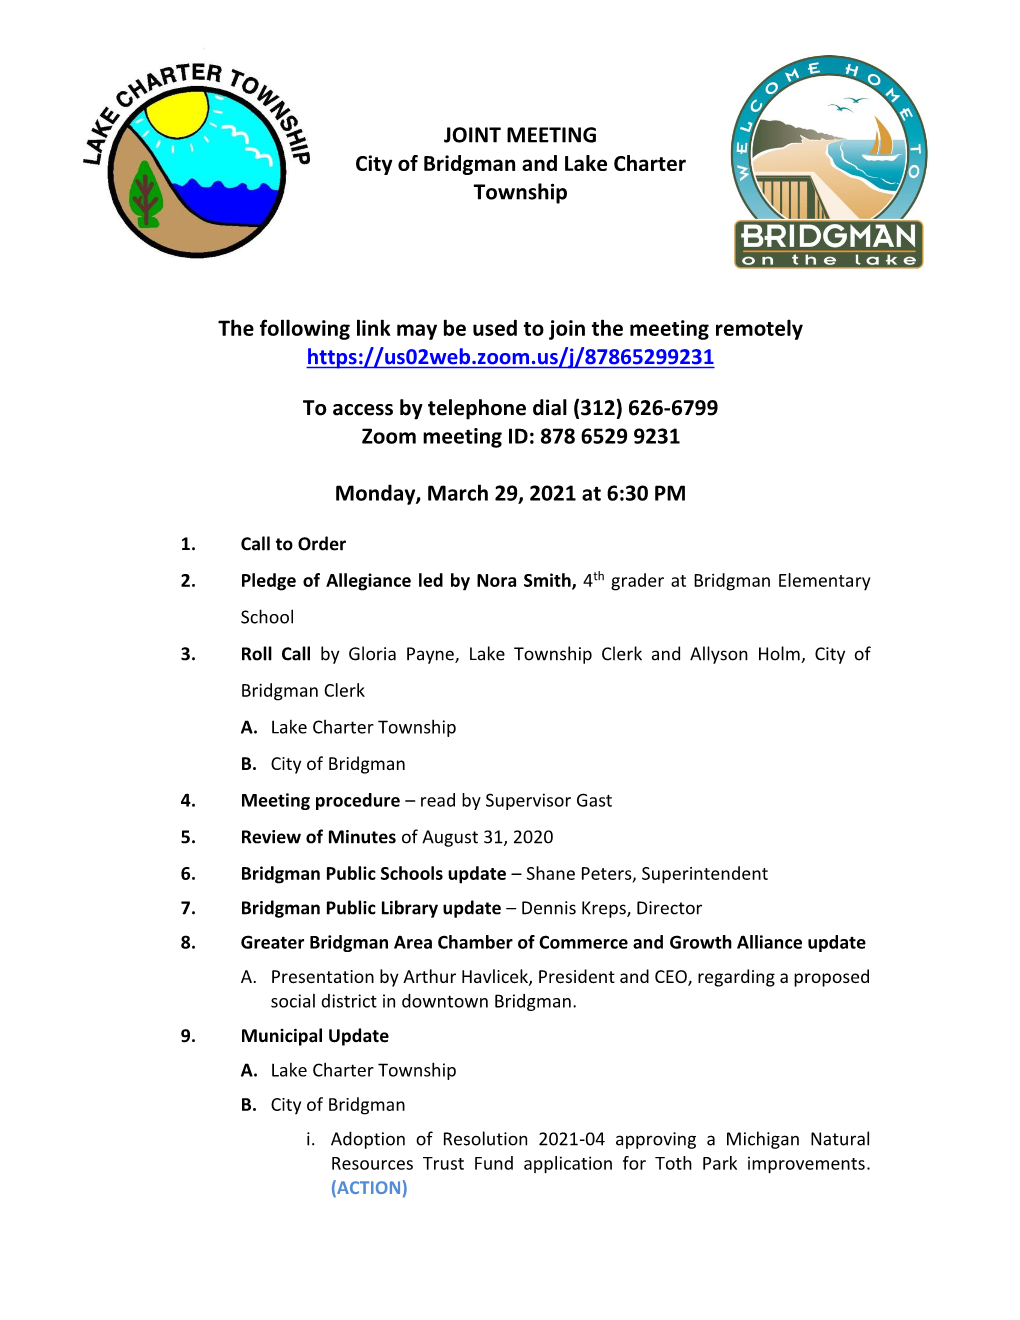 JOINT MEETING City of Bridgman and Lake Charter Township the Following Link May Be Used to Join the Meeting Remotely